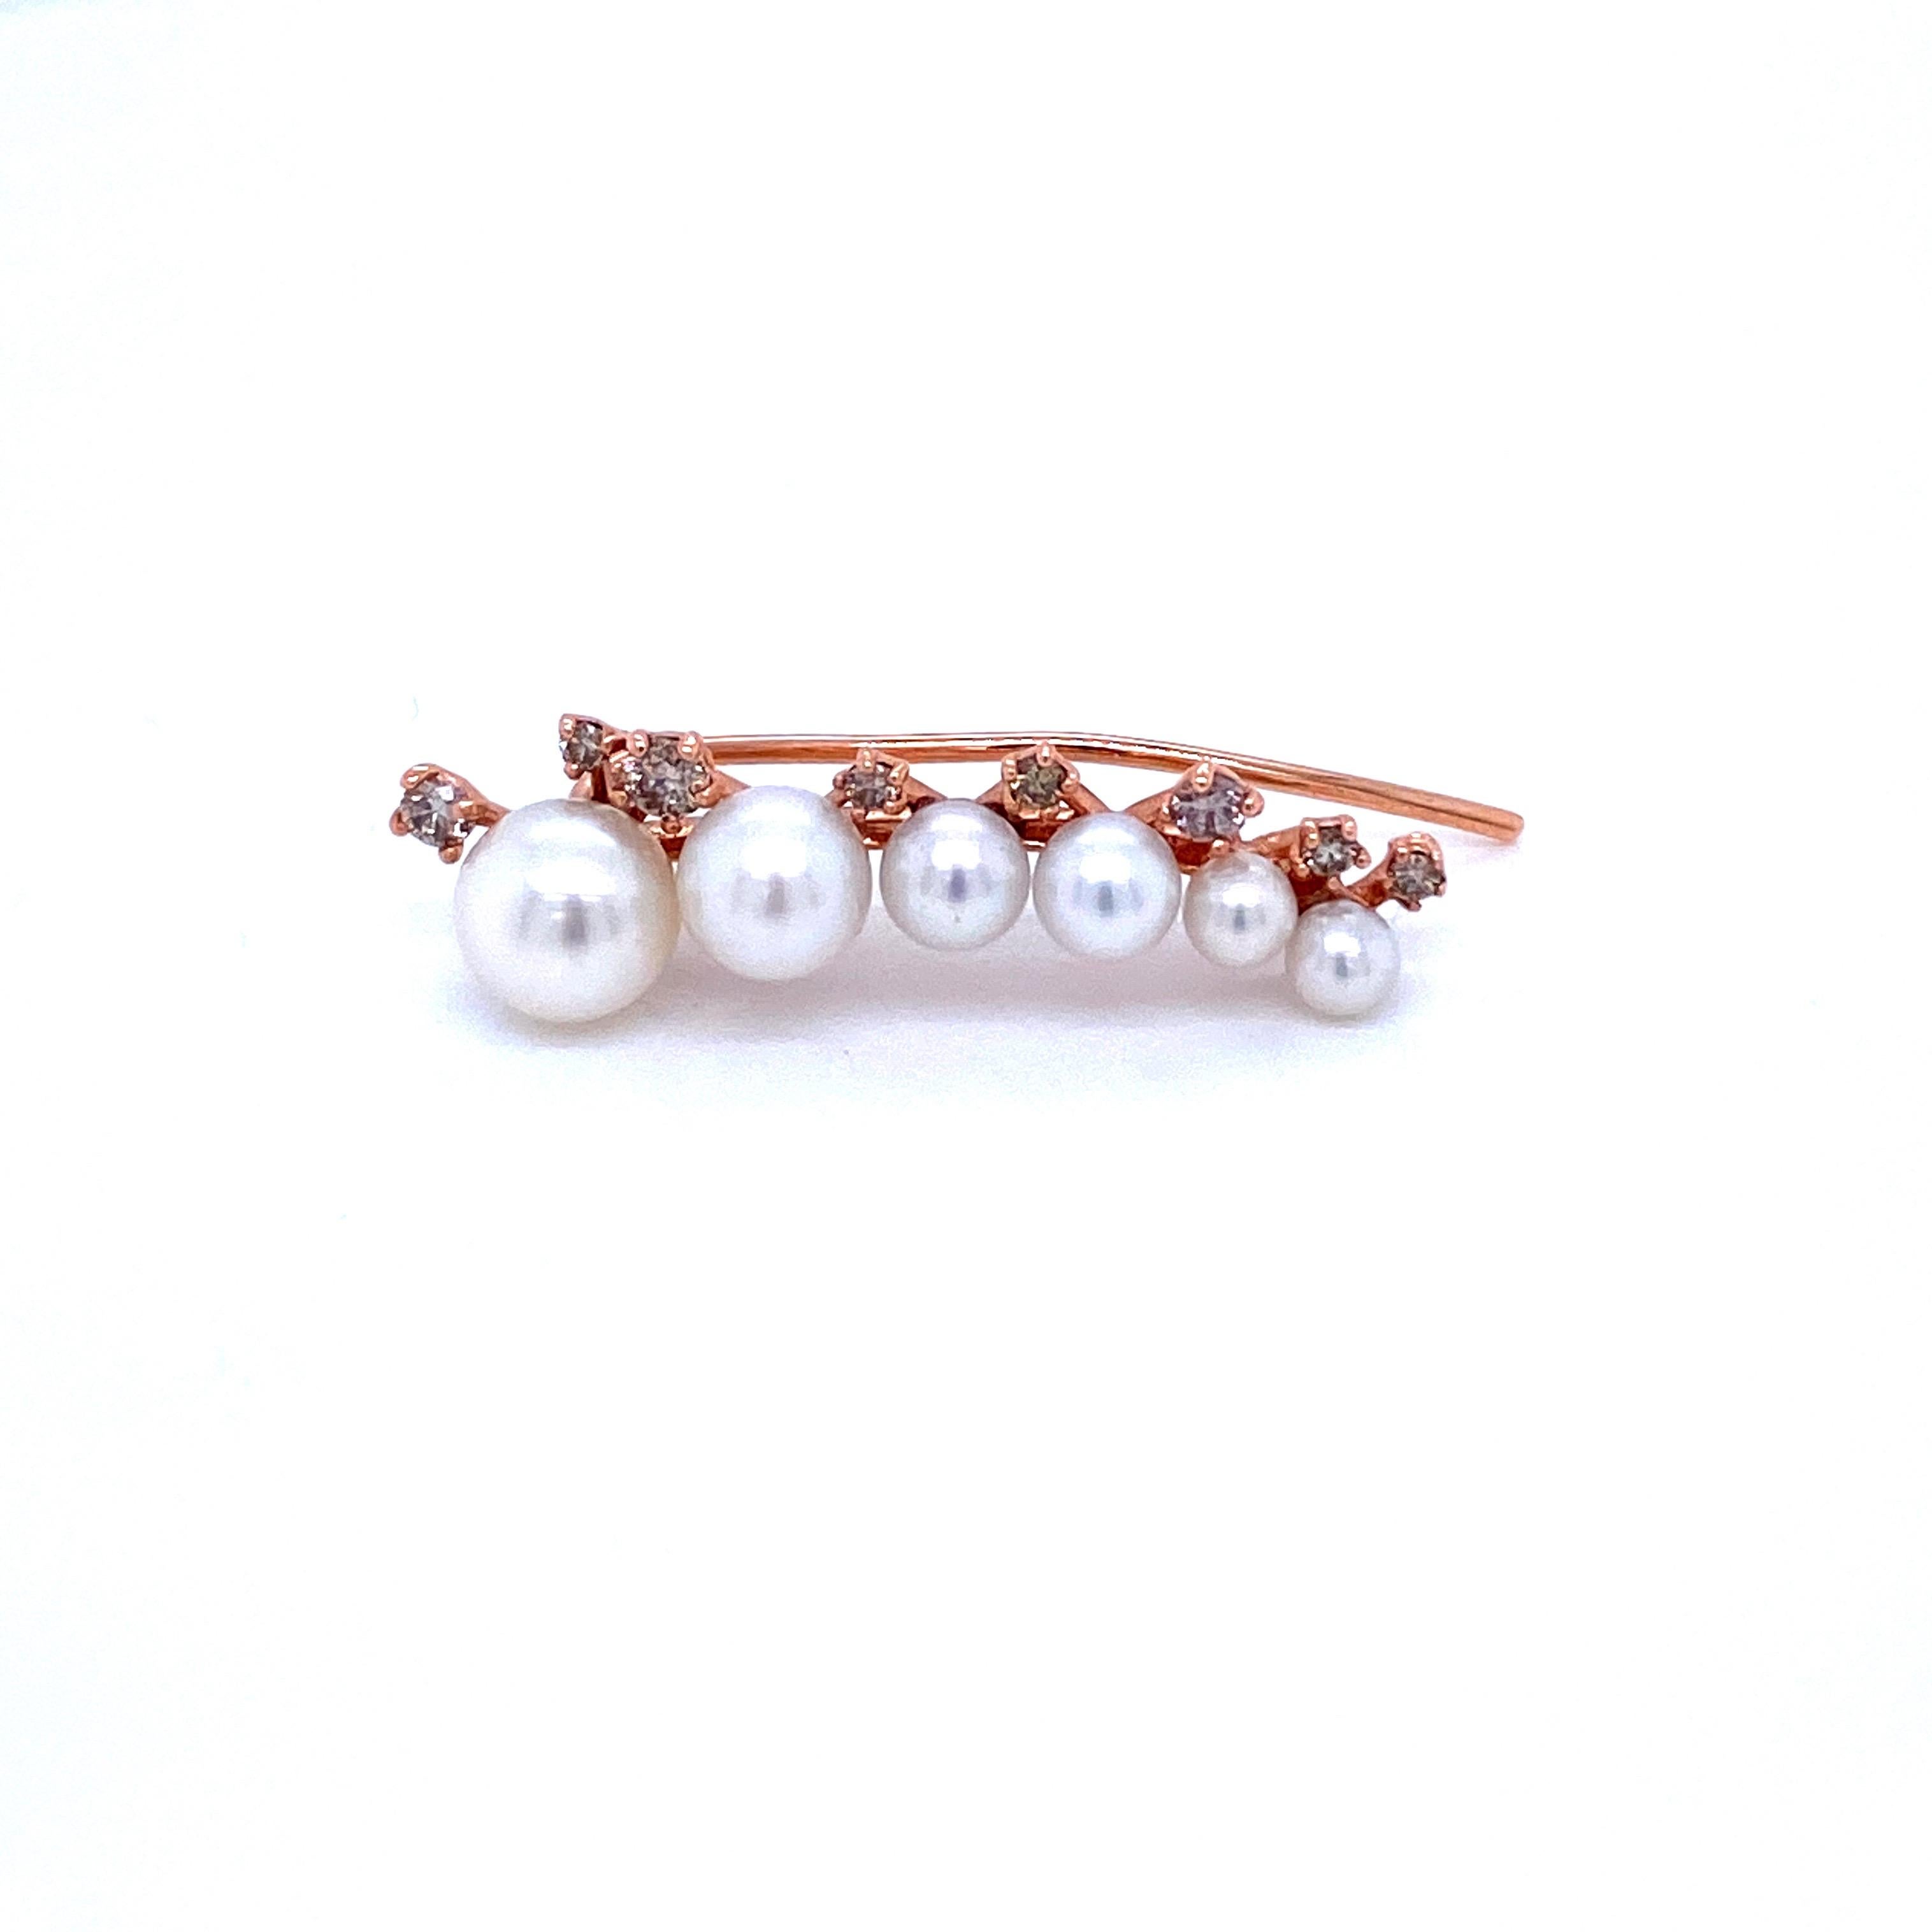 This unusual 14k rose gold erring is set with freshwater pearls and adorned by 0.10 carats of shimmering round cut diamonds. Wear yours day or night, drop or ear way.
Earring sold single, also sold in pairs, contact us for information

CONDITION: